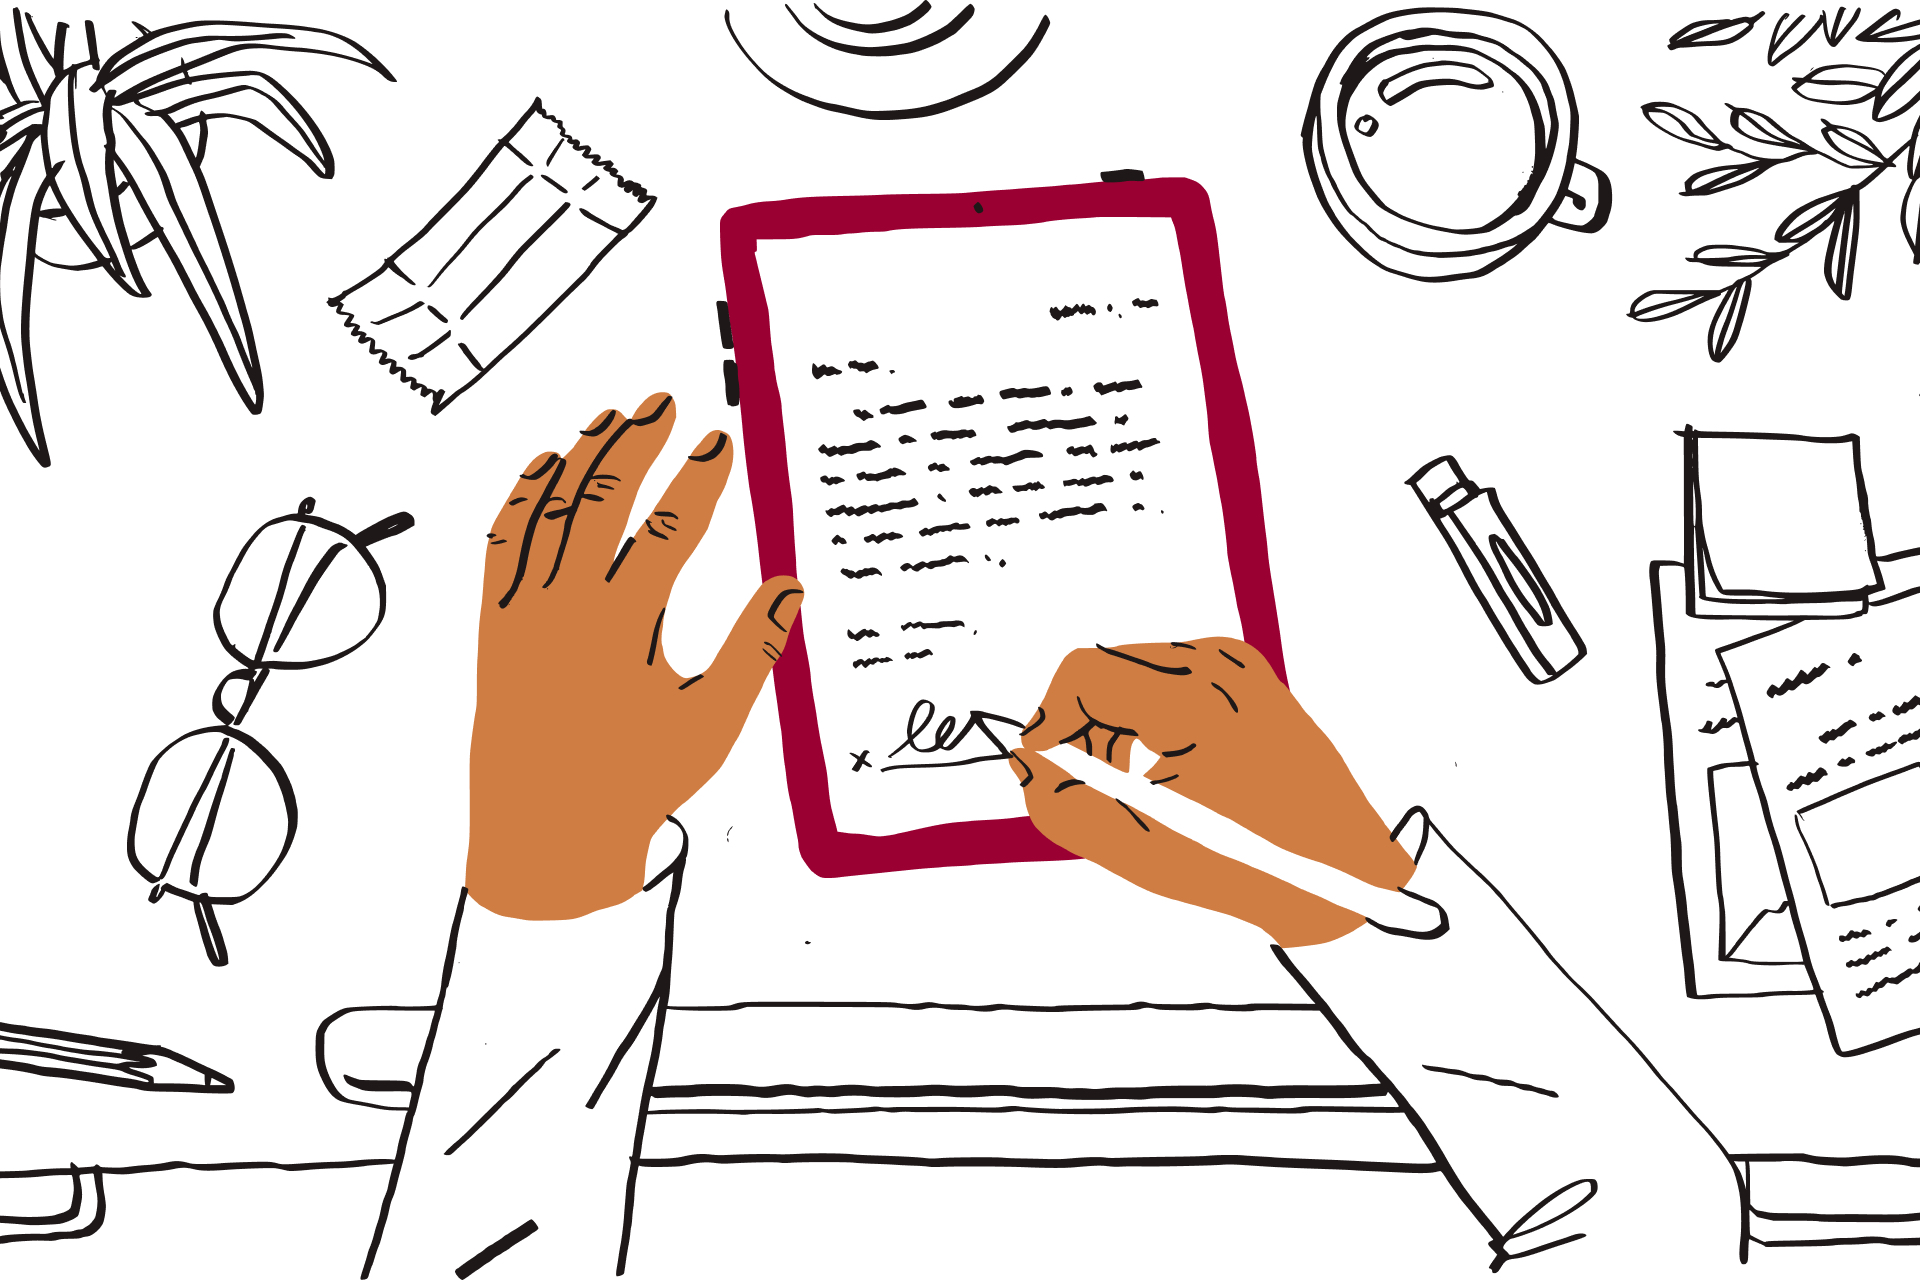 An illustration of a person signing a document in the traditional manner, which can be optimized with eSignature tools like HelloSign from Dropbox